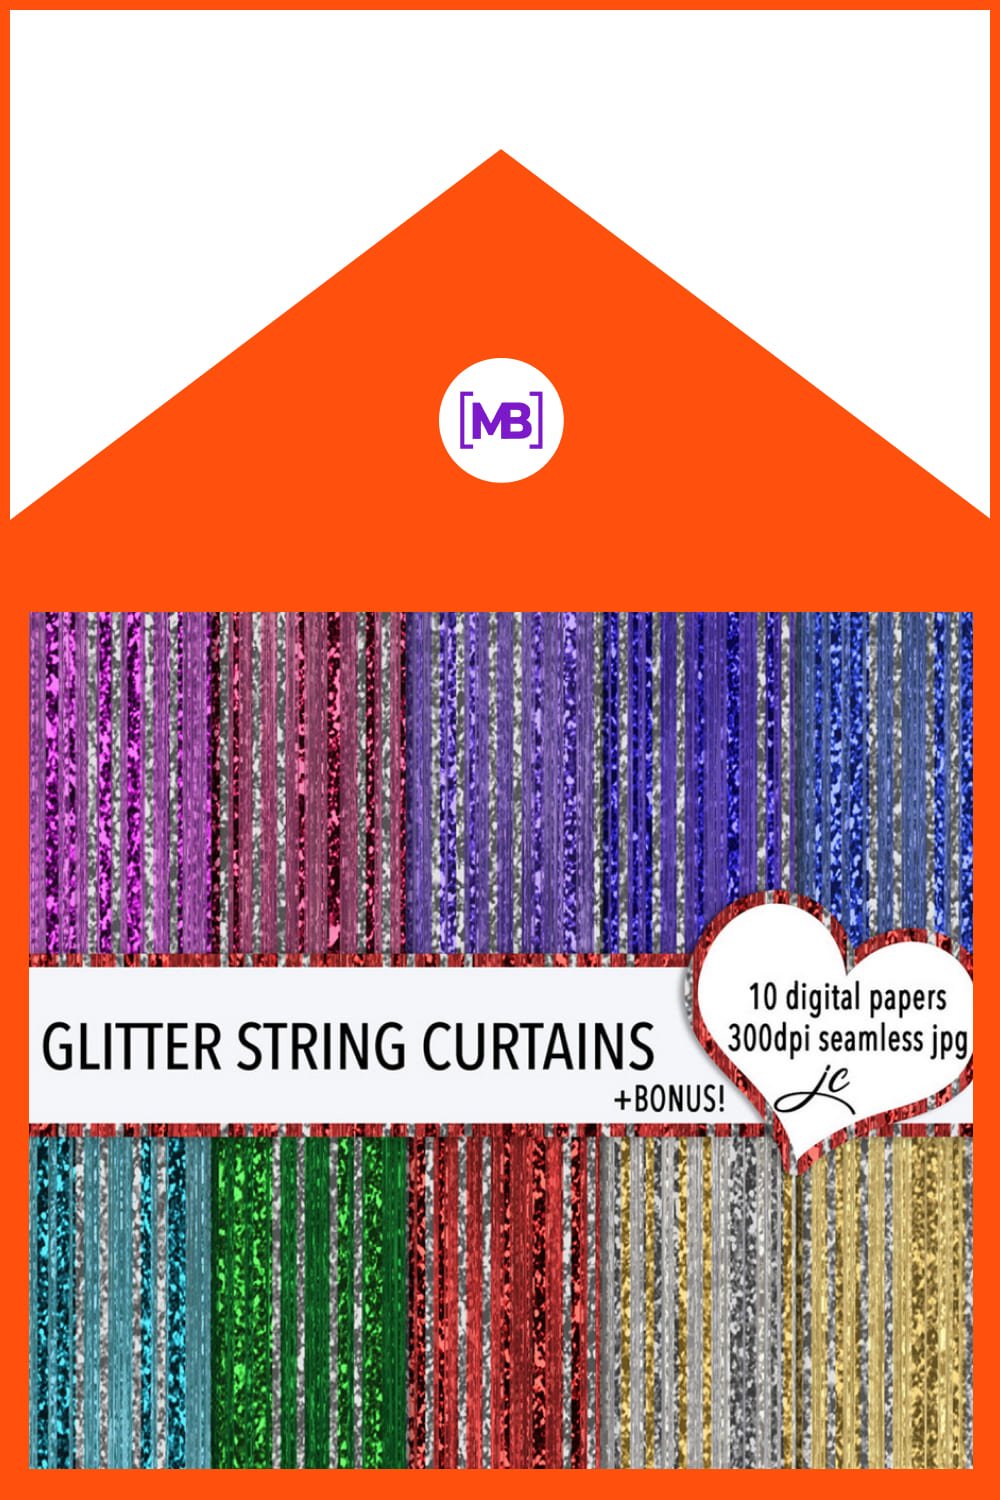 Glitter string curtains in different colorful colors.